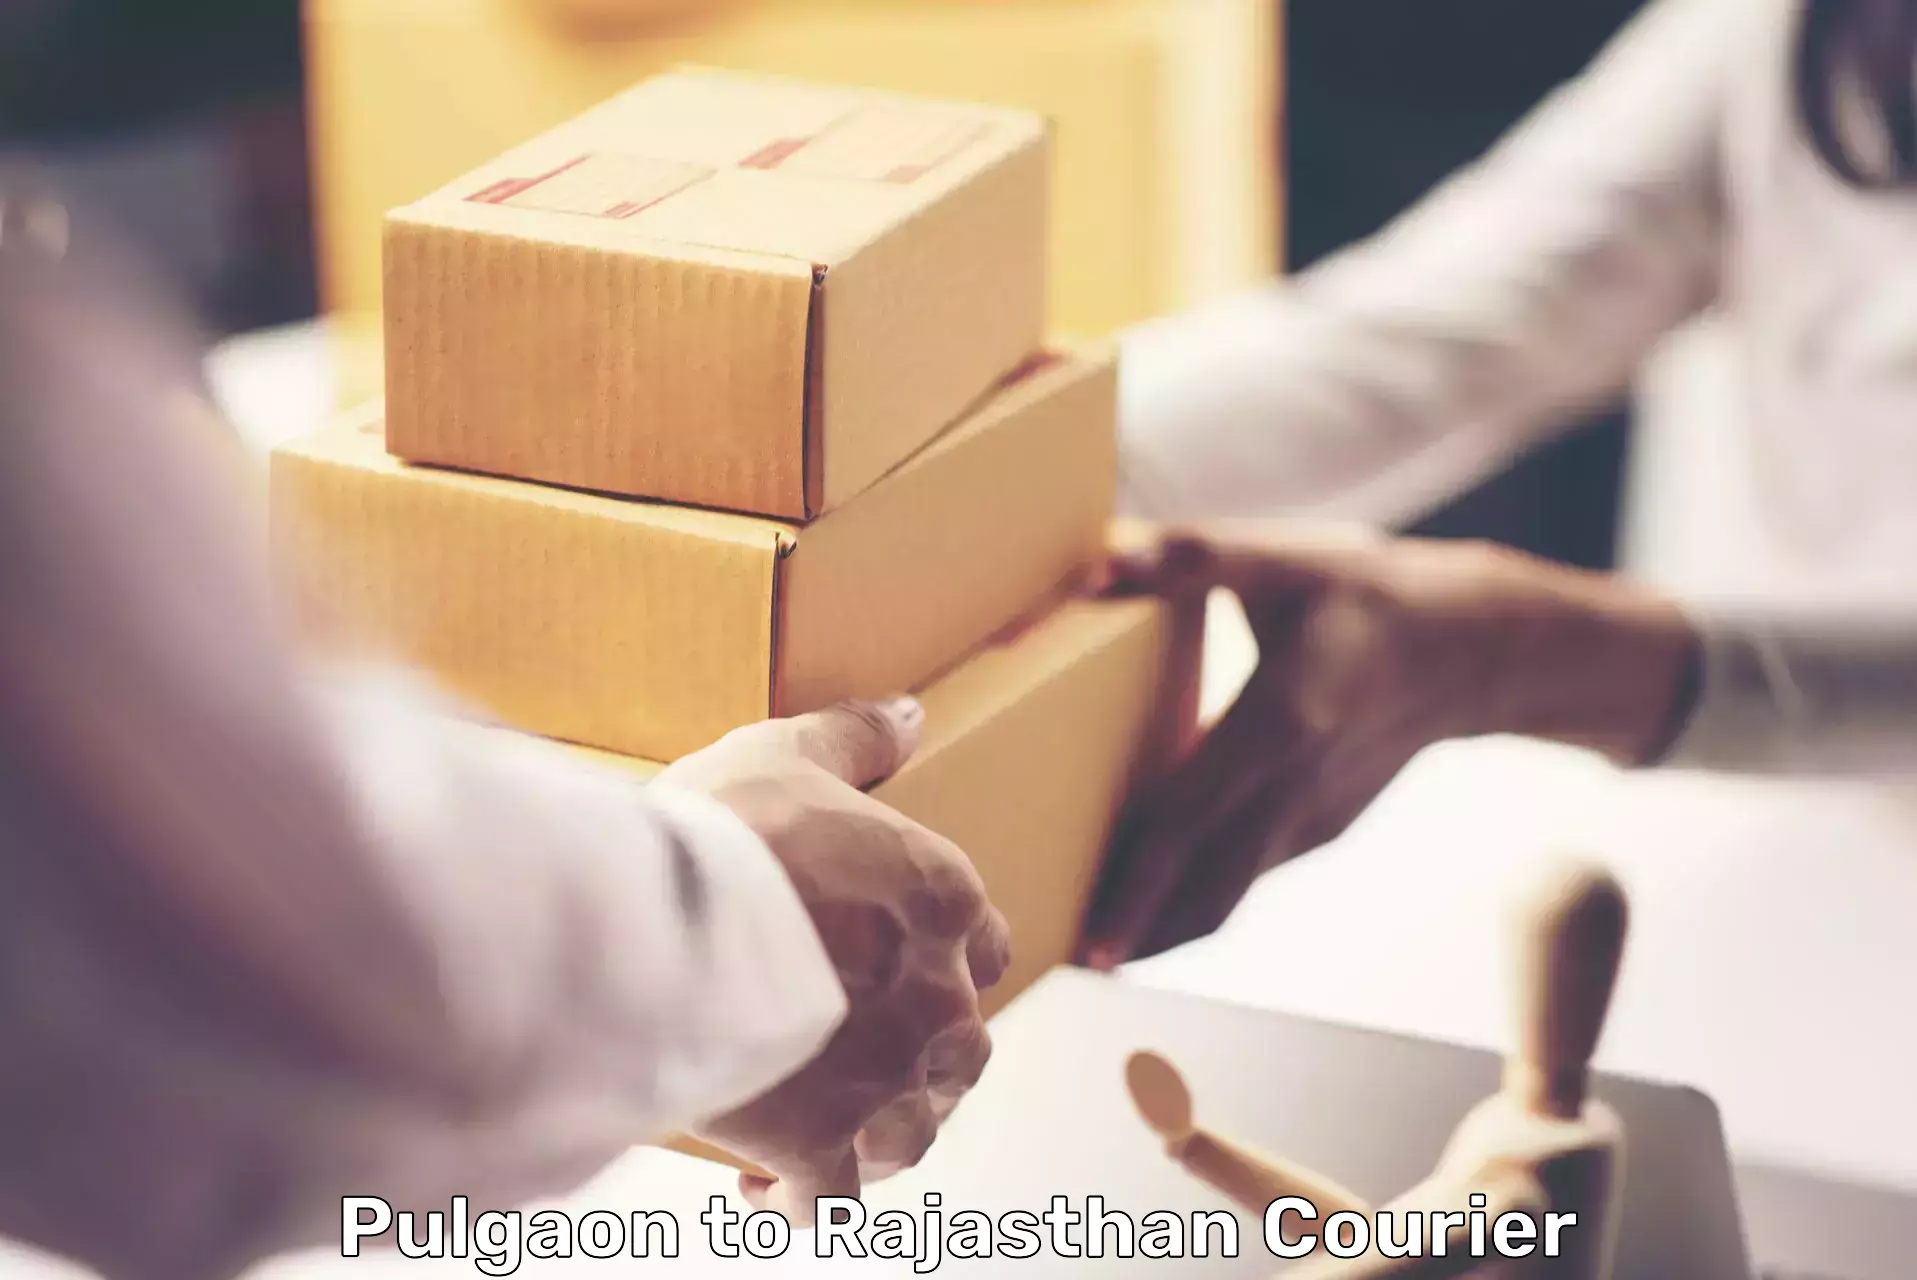 Reliable courier service Pulgaon to Nasirabad